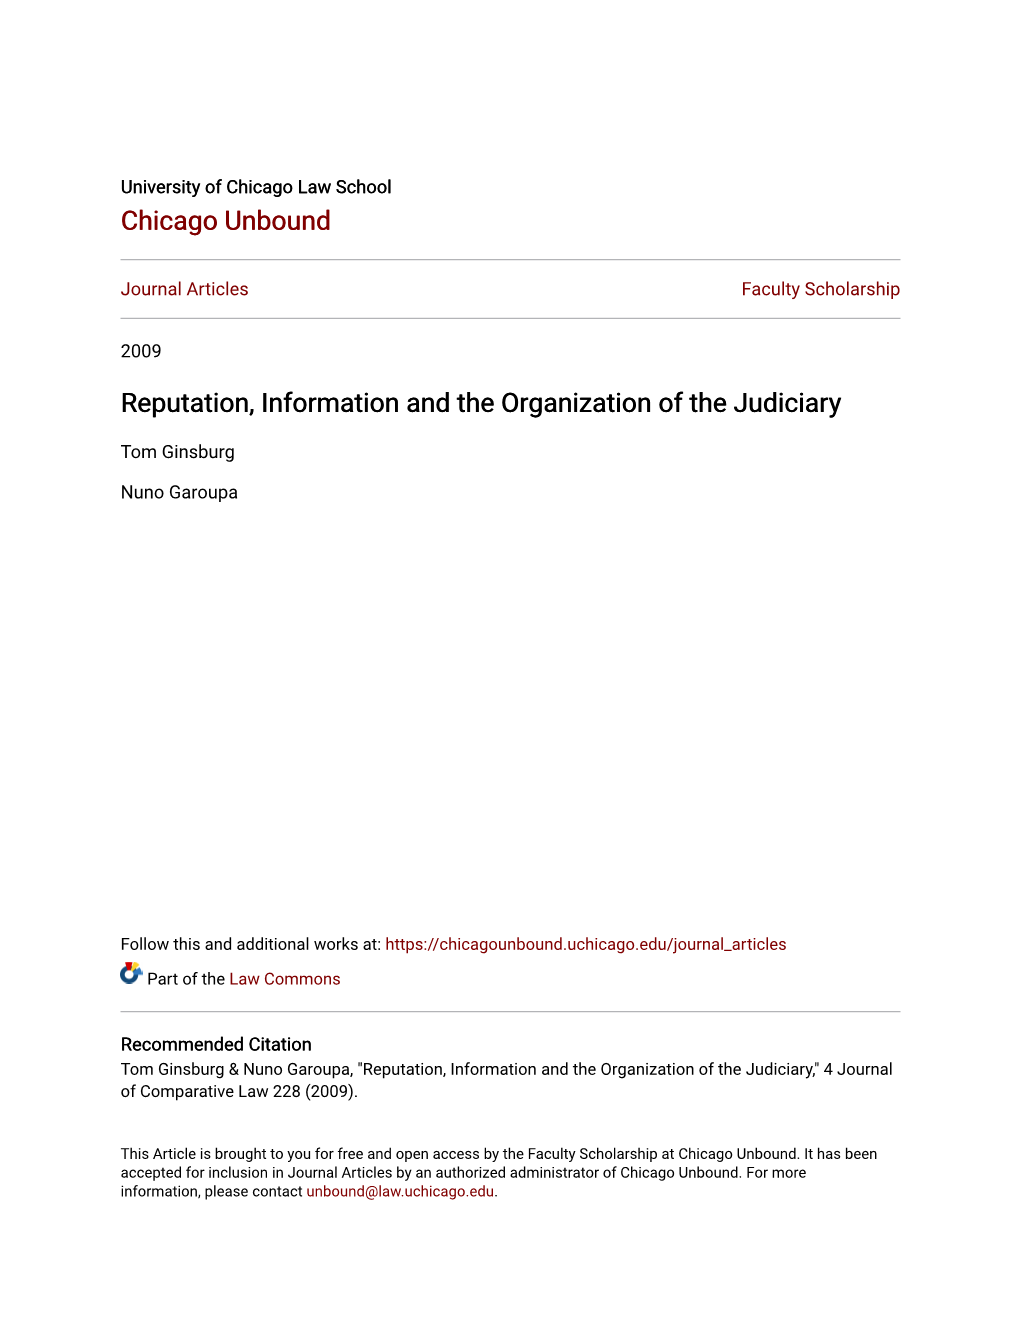 Reputation, Information and the Organization of the Judiciary